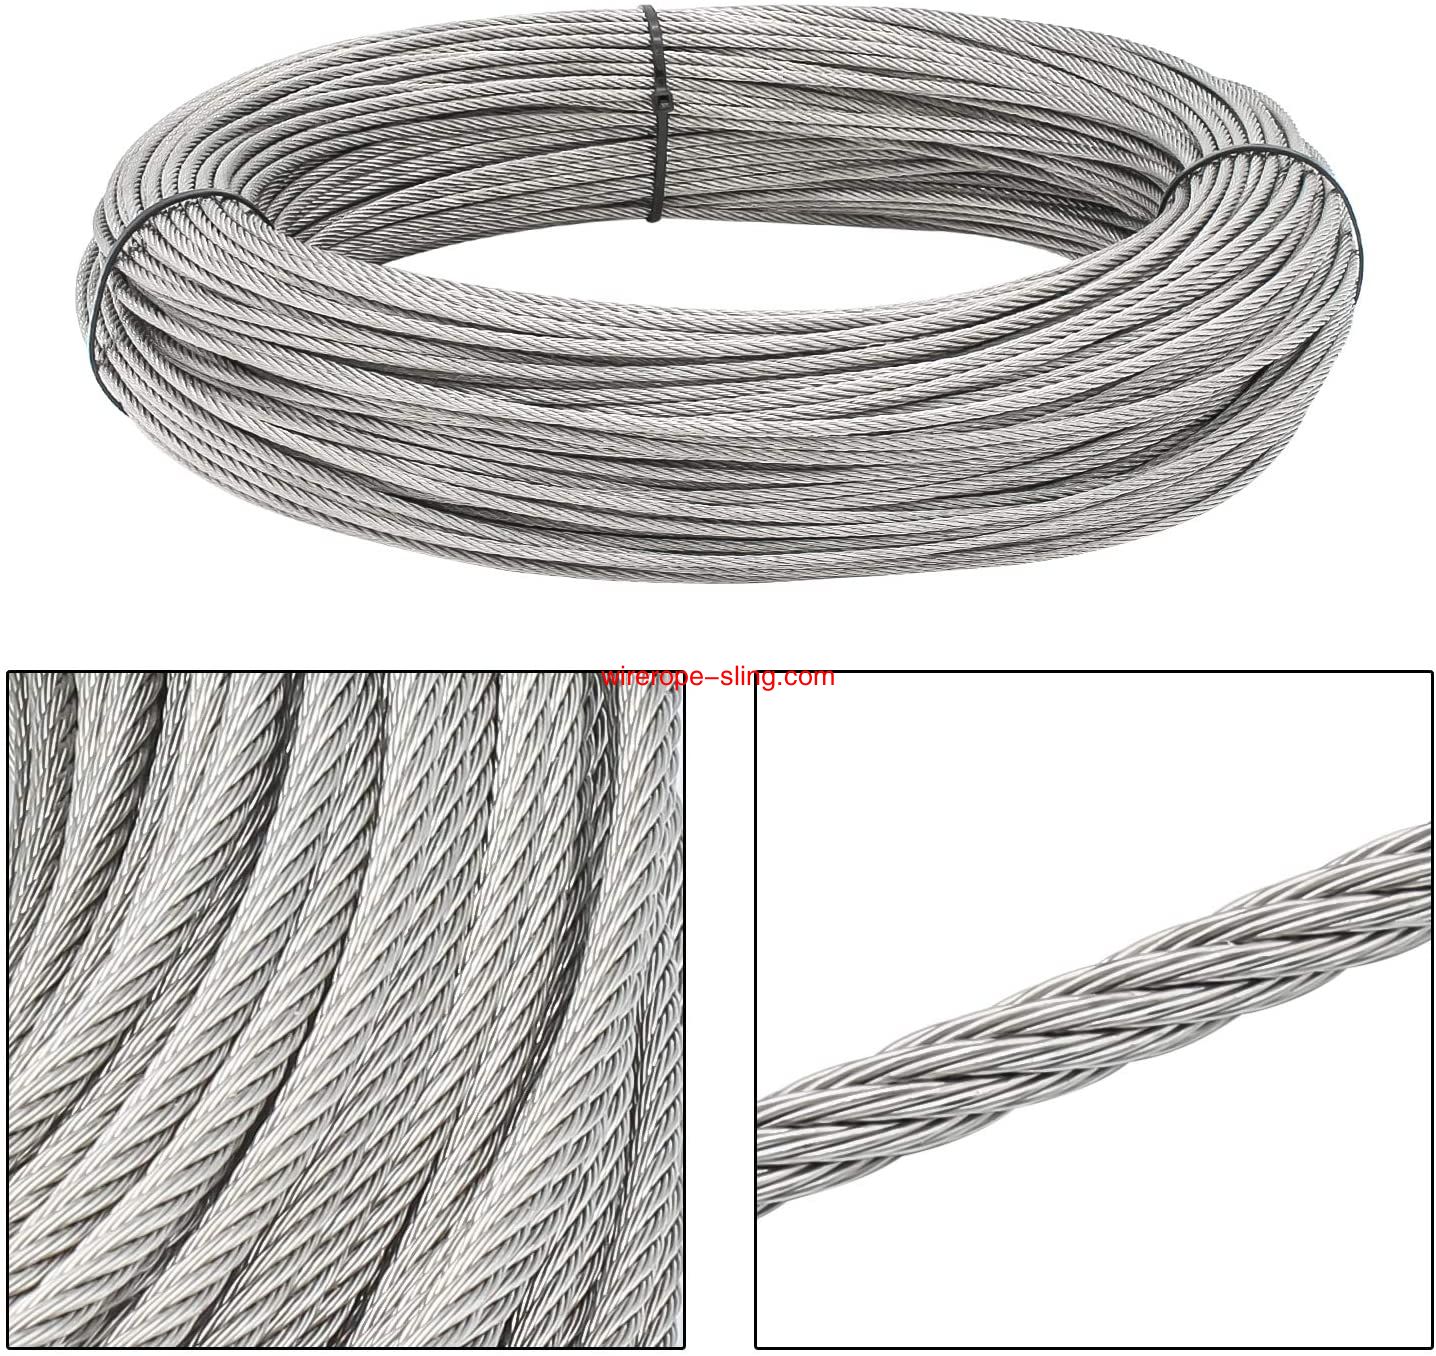 T316 Marin Grade 3mm Stainless Steel Aircraft Wire Rope Cable for Railing, Decking, DIY Balustrade, 100 Voet